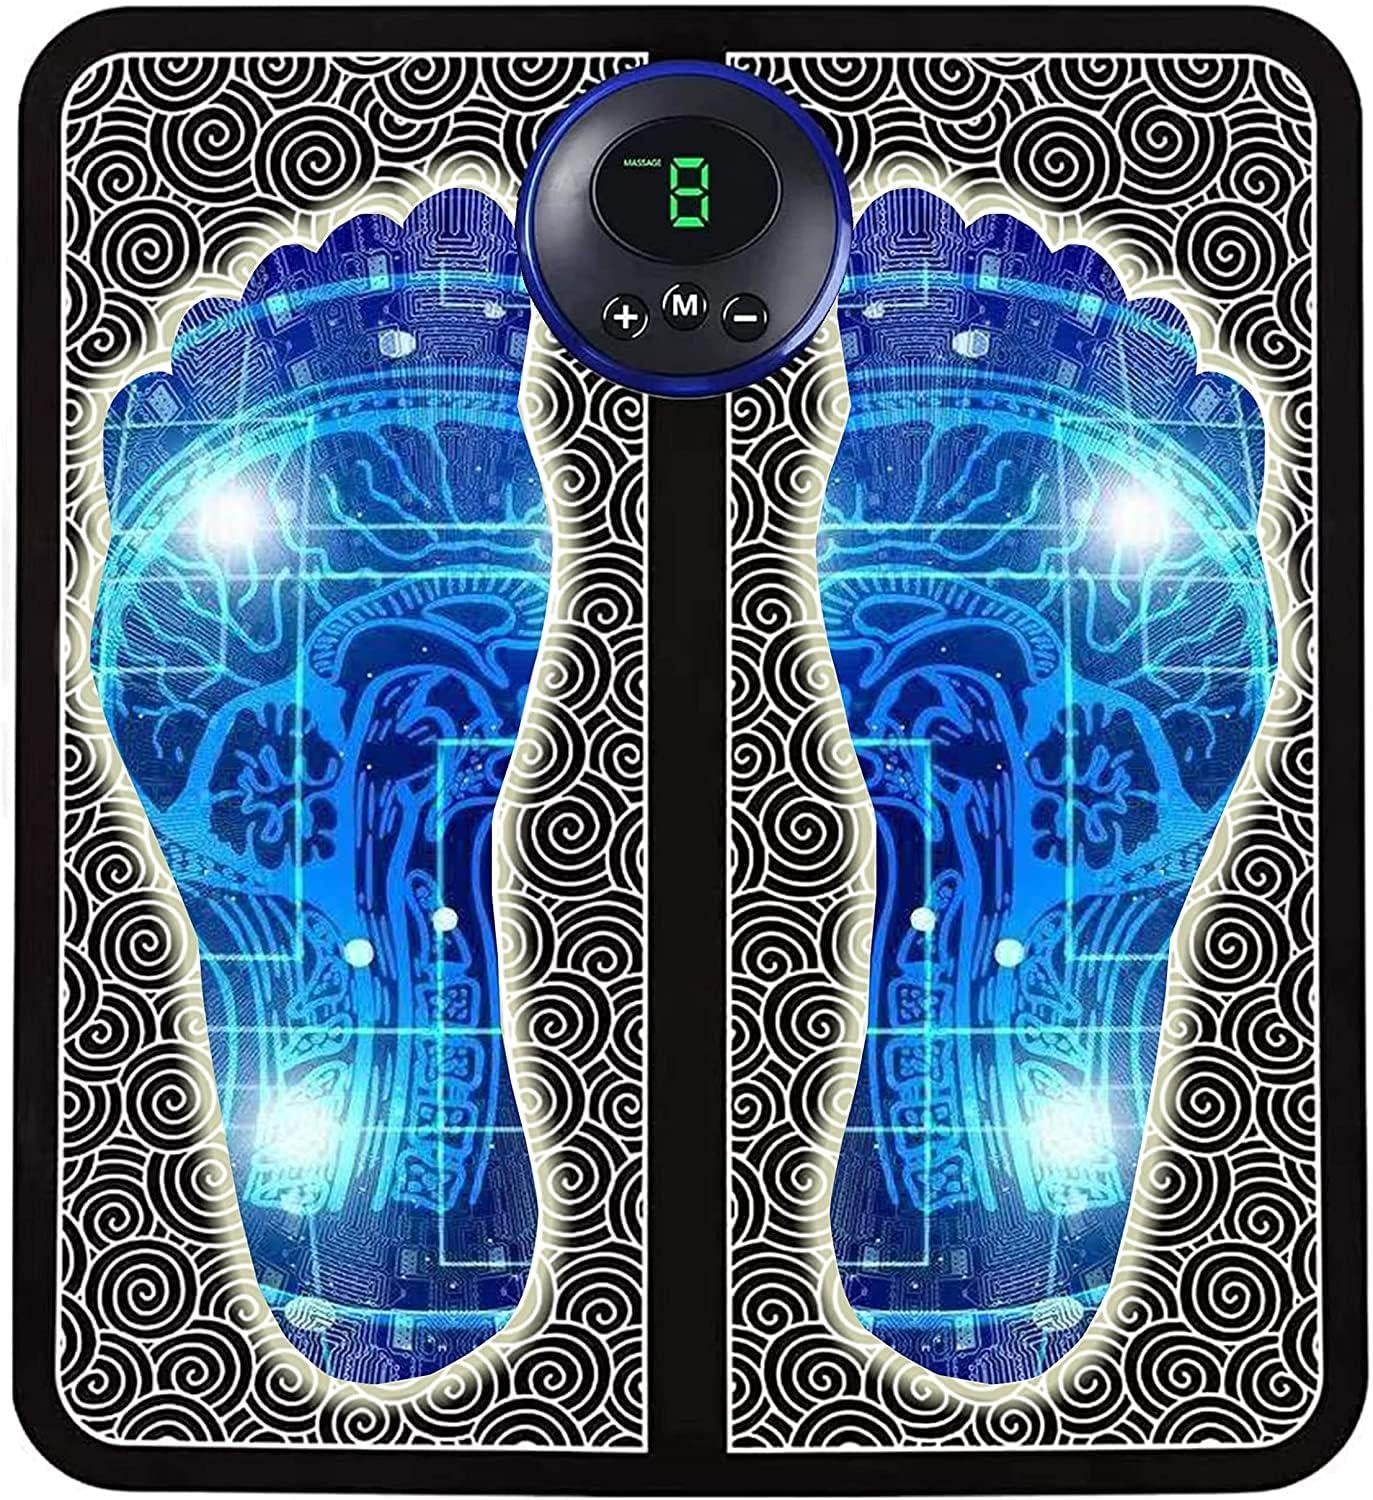 Foot Massagerm,Foot Massager Pain Relief Wireless Electric EMS Massager,Rechargeable Portable Folding Automatic with 8 Mode19 Intensity for Legs,Body,Hand Therapy (black)